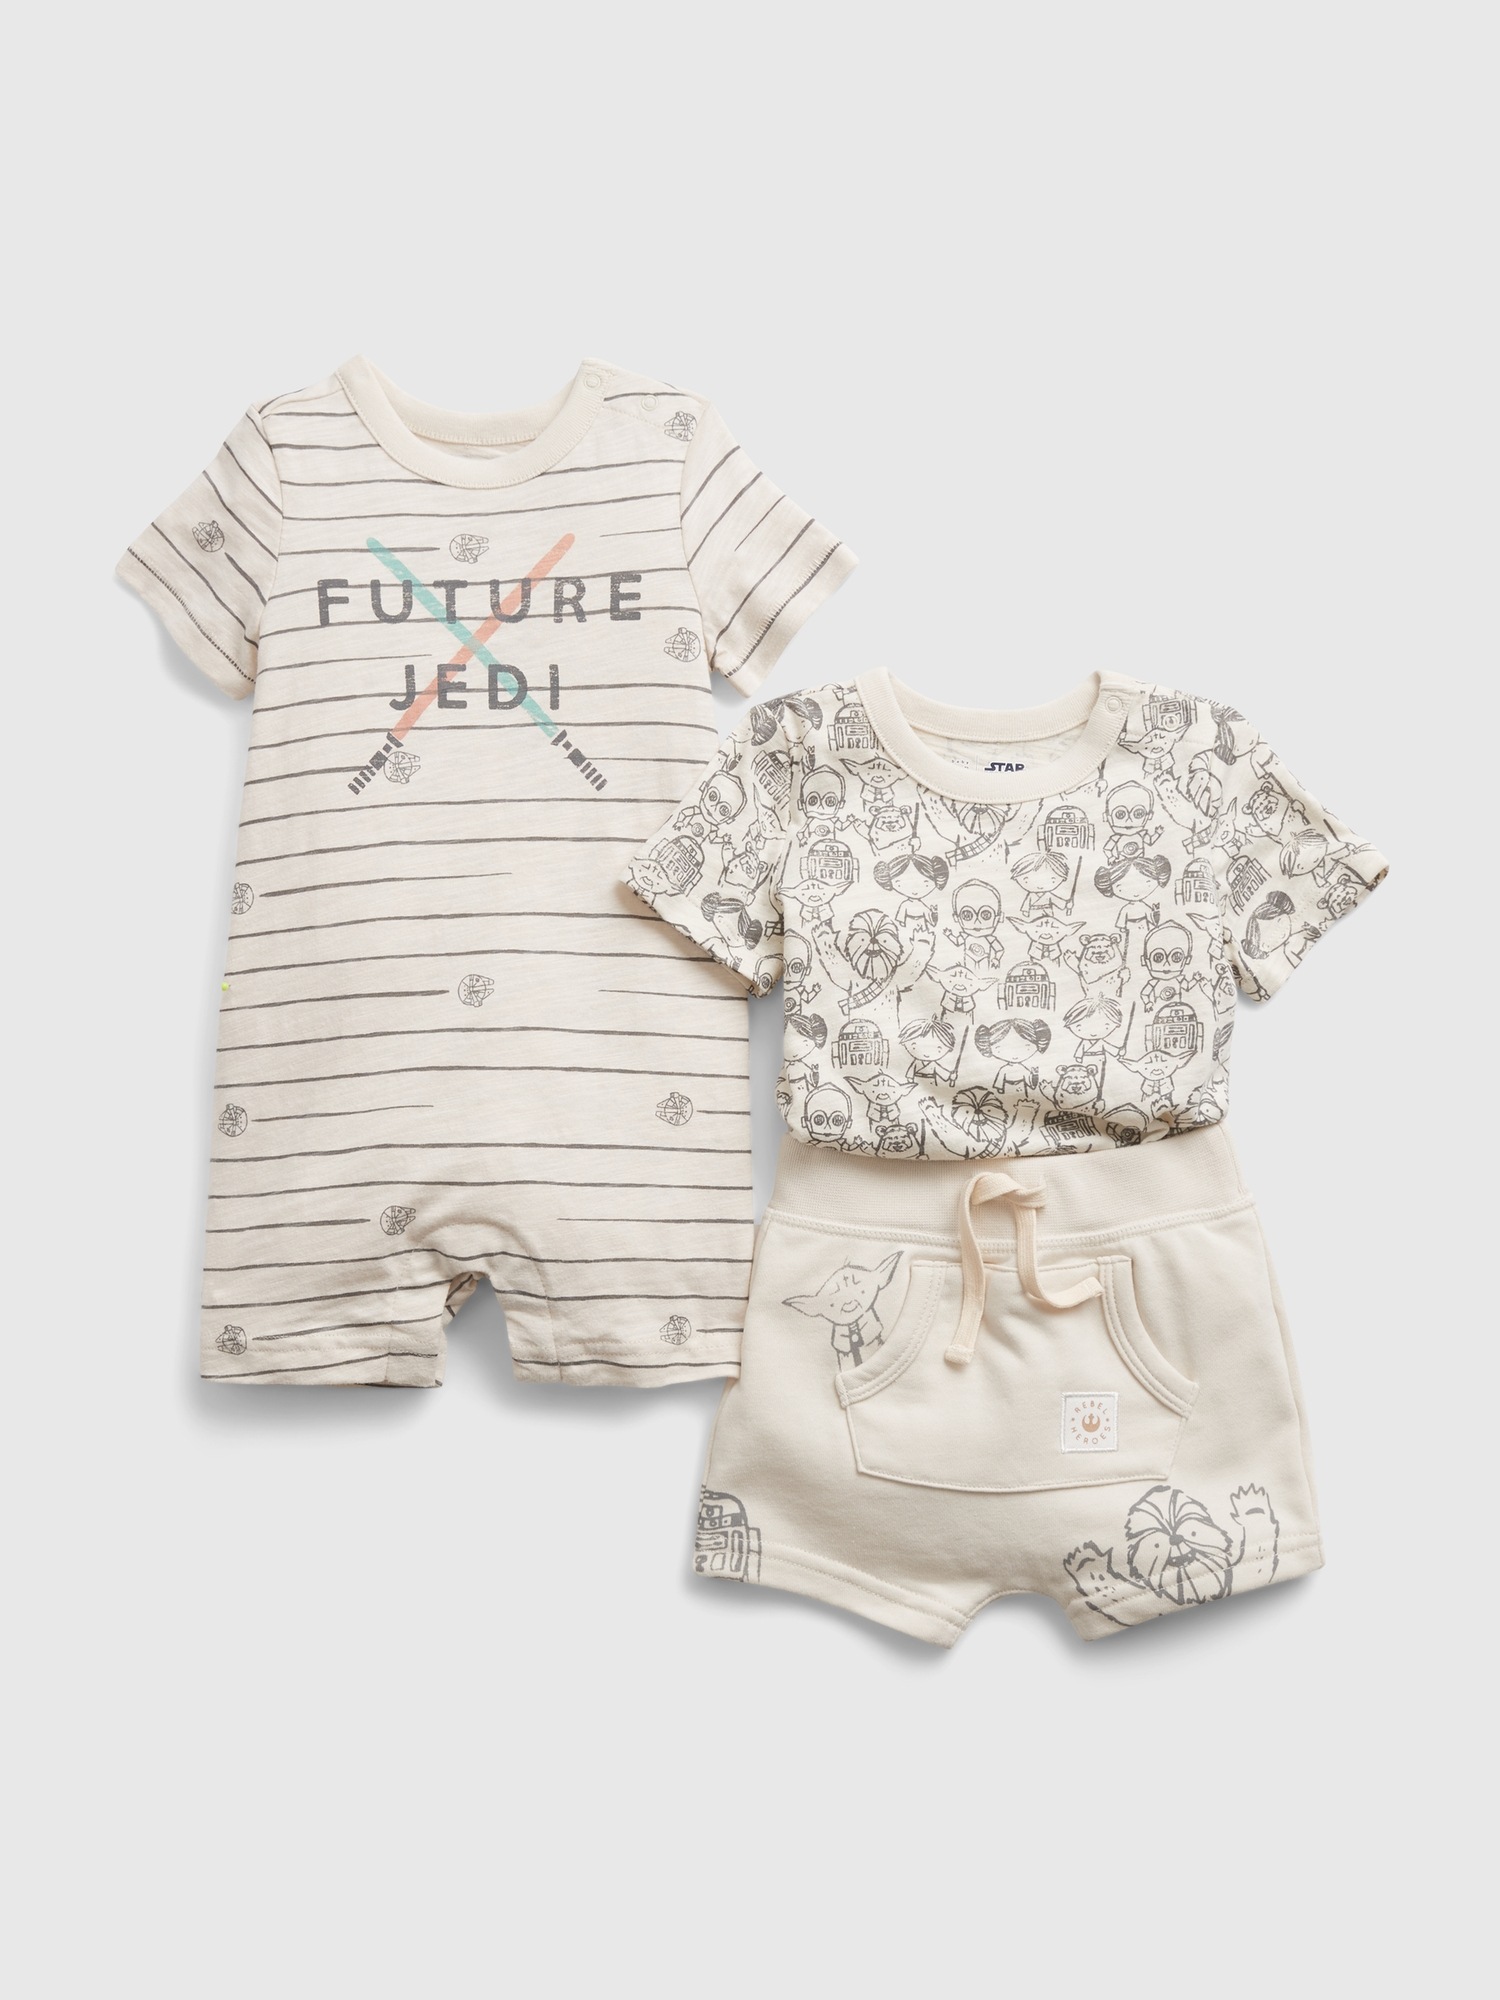 babyGap | Star Wars™ Outfit 3-Pack | Gap